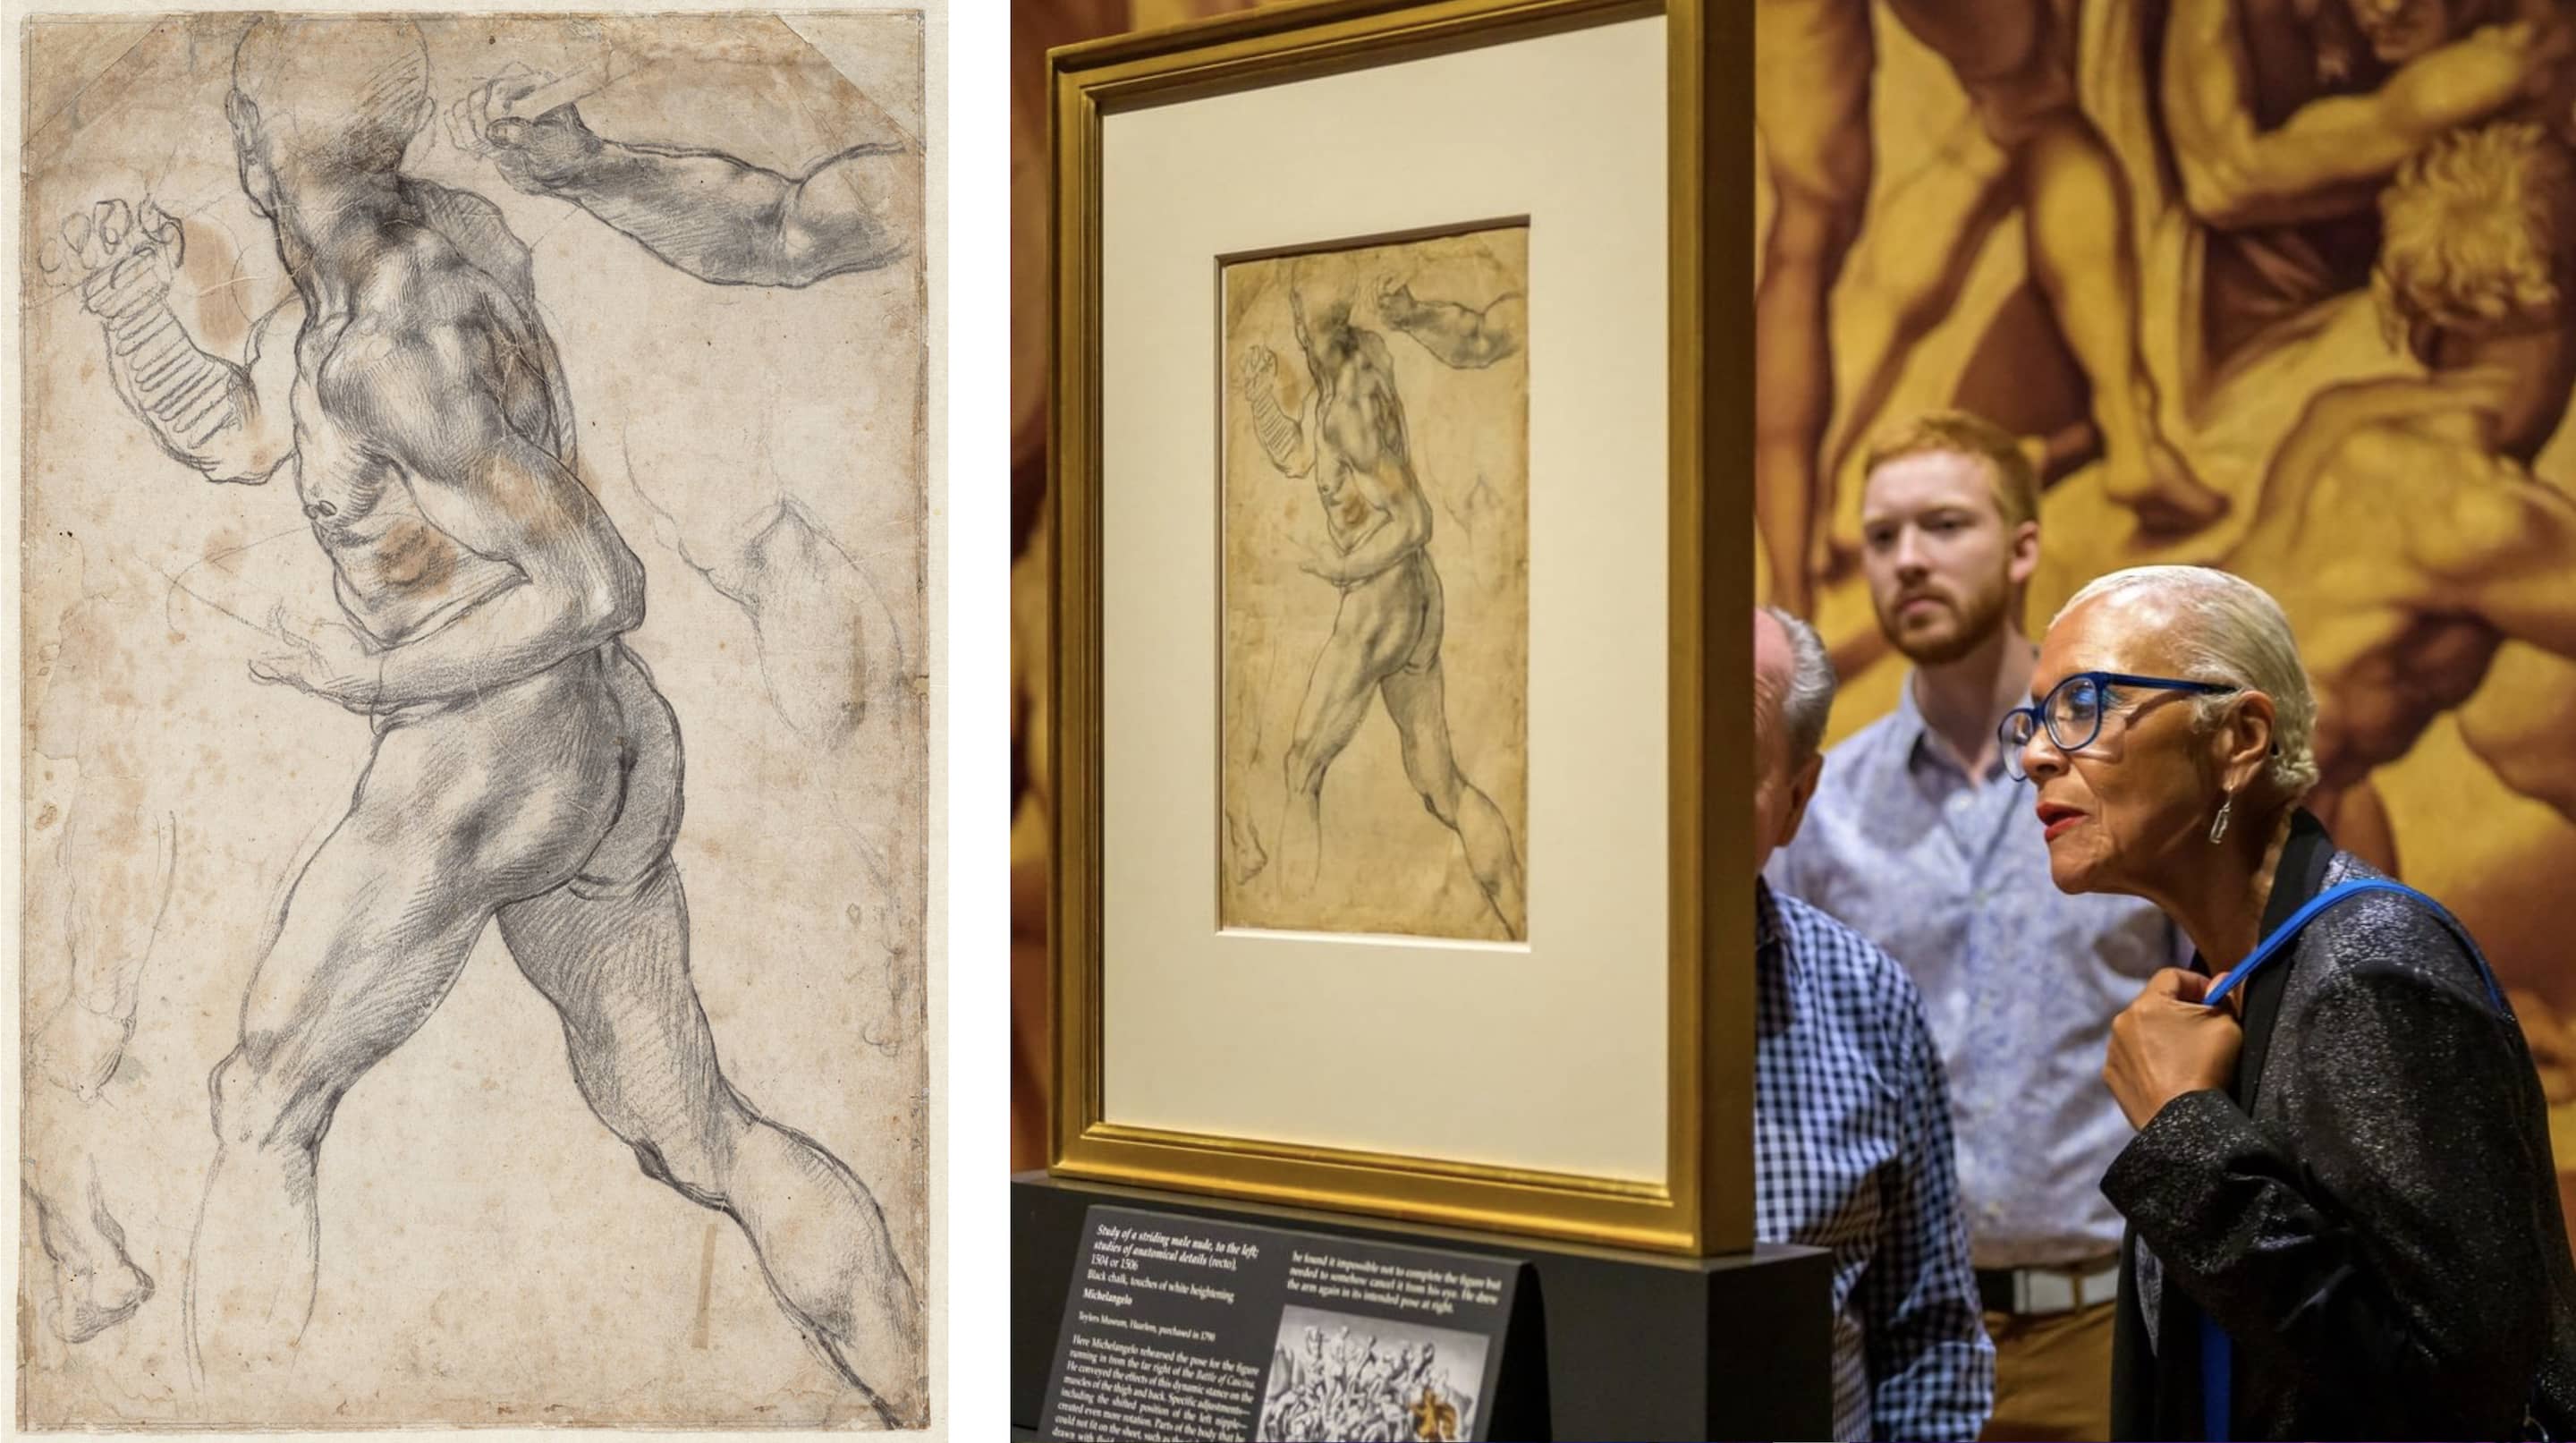 Left: a drawing of a nude male body, seen from behind; Right: a woman viewing this drawing in a museum gallery.